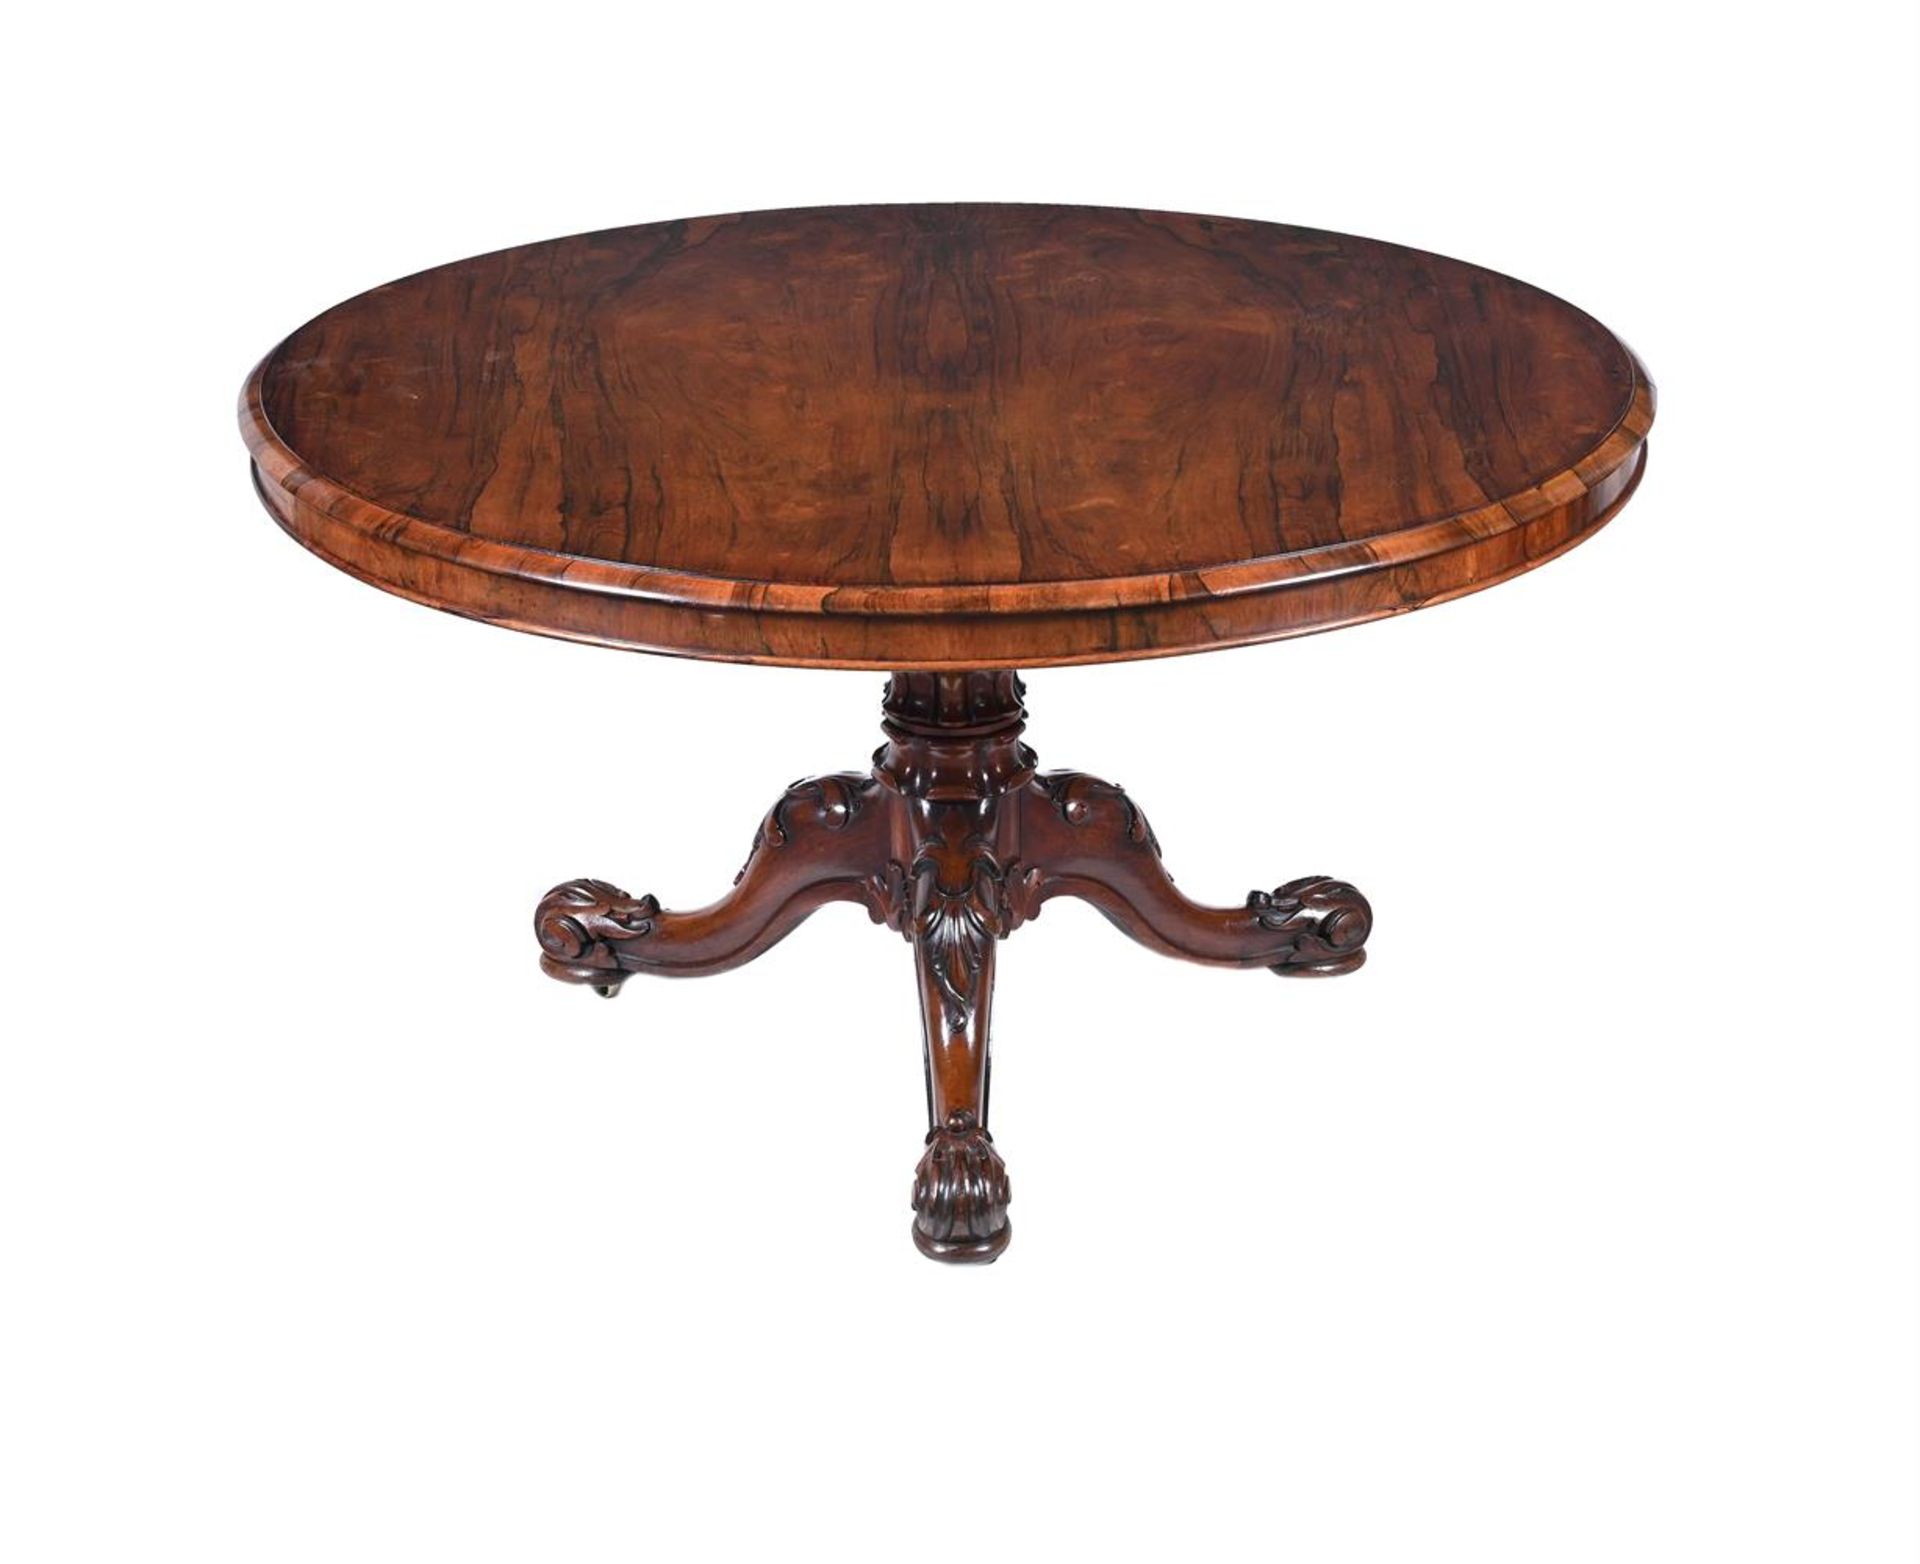 Y AN EARLY VICTORIAN ROSEWOOD CENTRE TABLE - Image 2 of 2